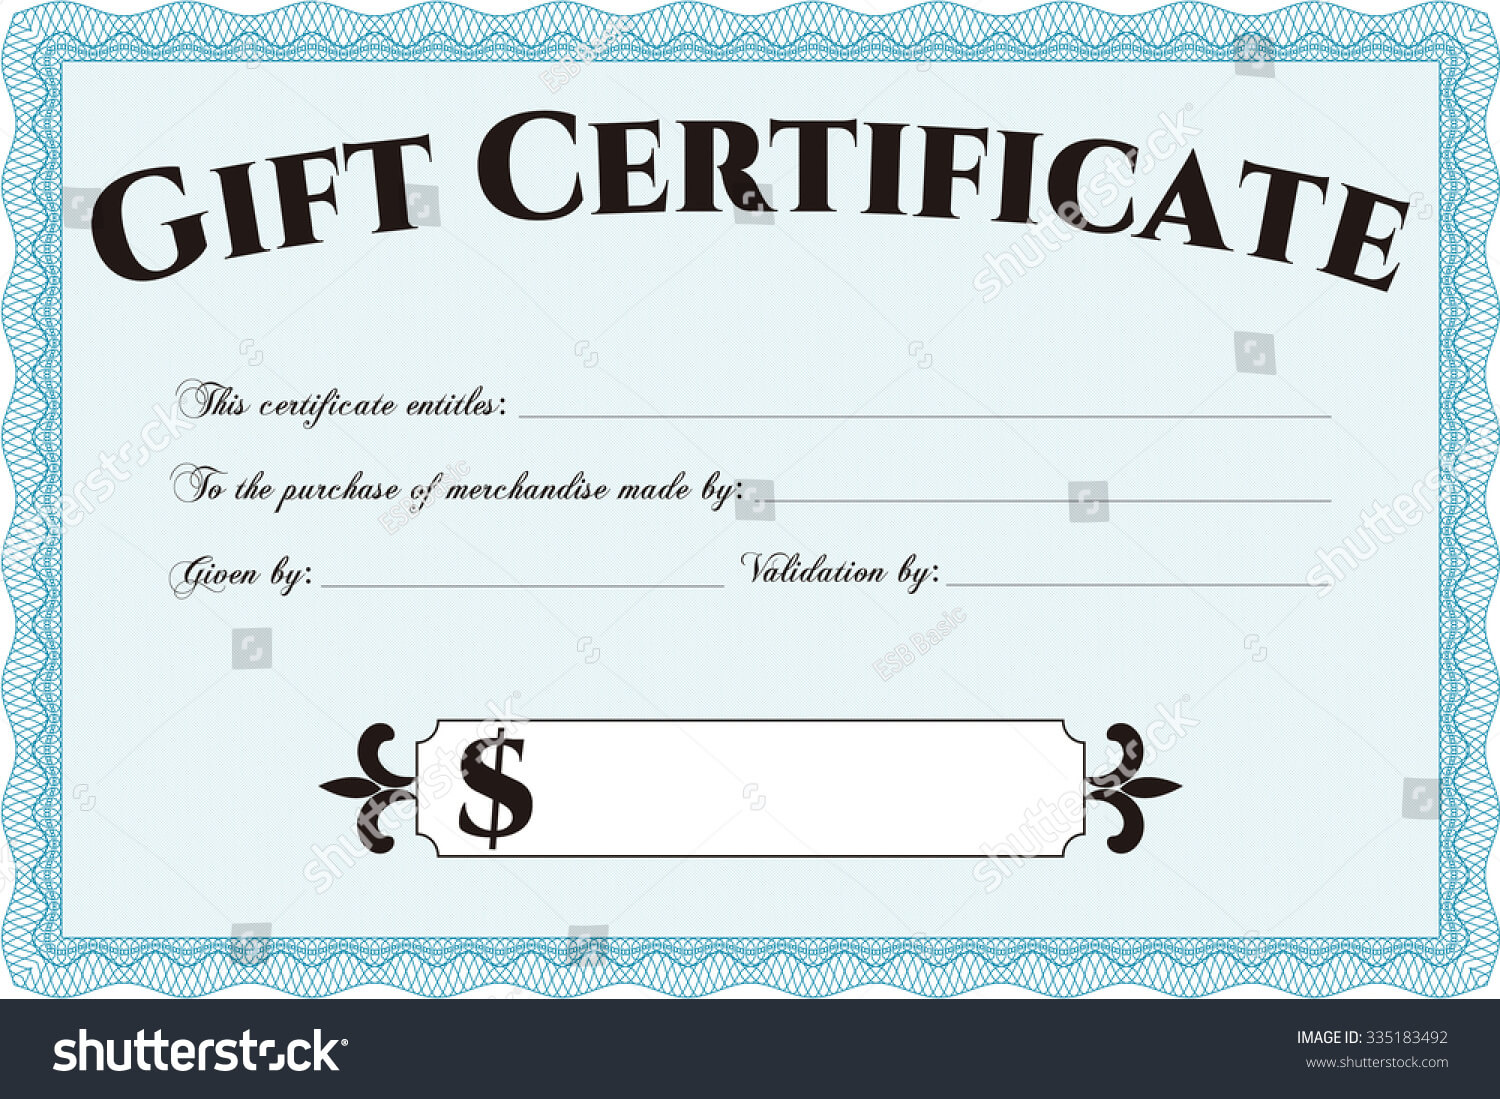 This Certificate Entitles The Bearer Template ] - Donation Inside This Certificate Entitles The Bearer To Template